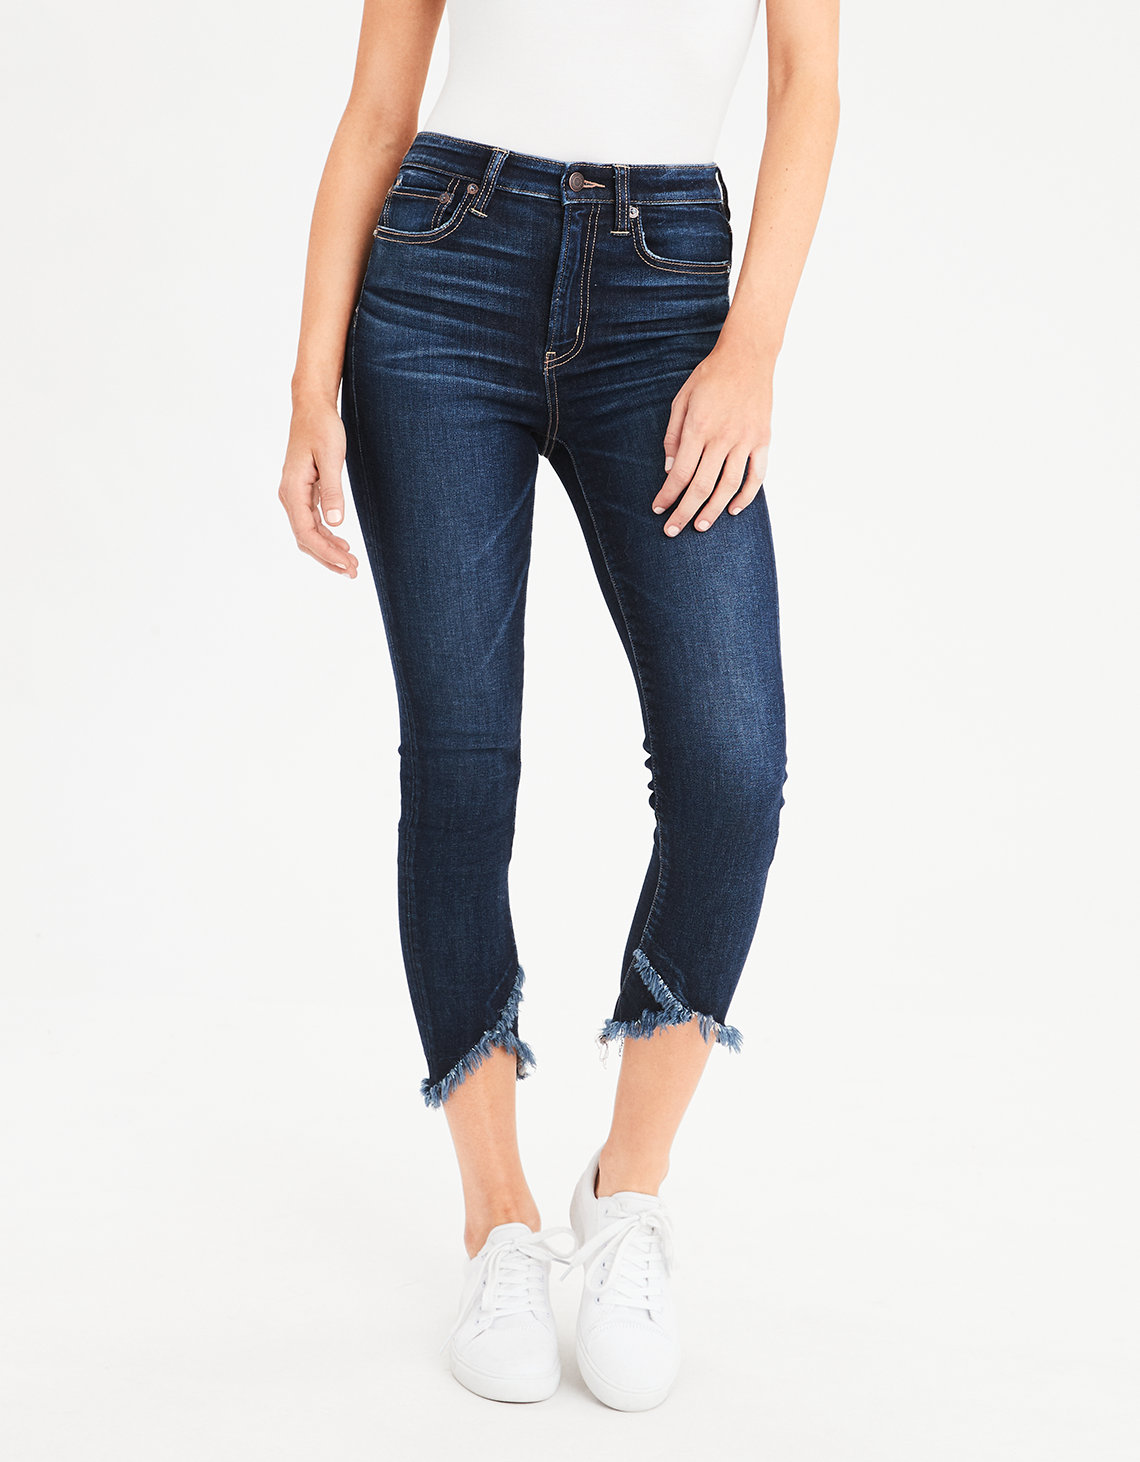 AE Ne(X)T Level Super High-Waisted Jegging Crop - Deep Waters